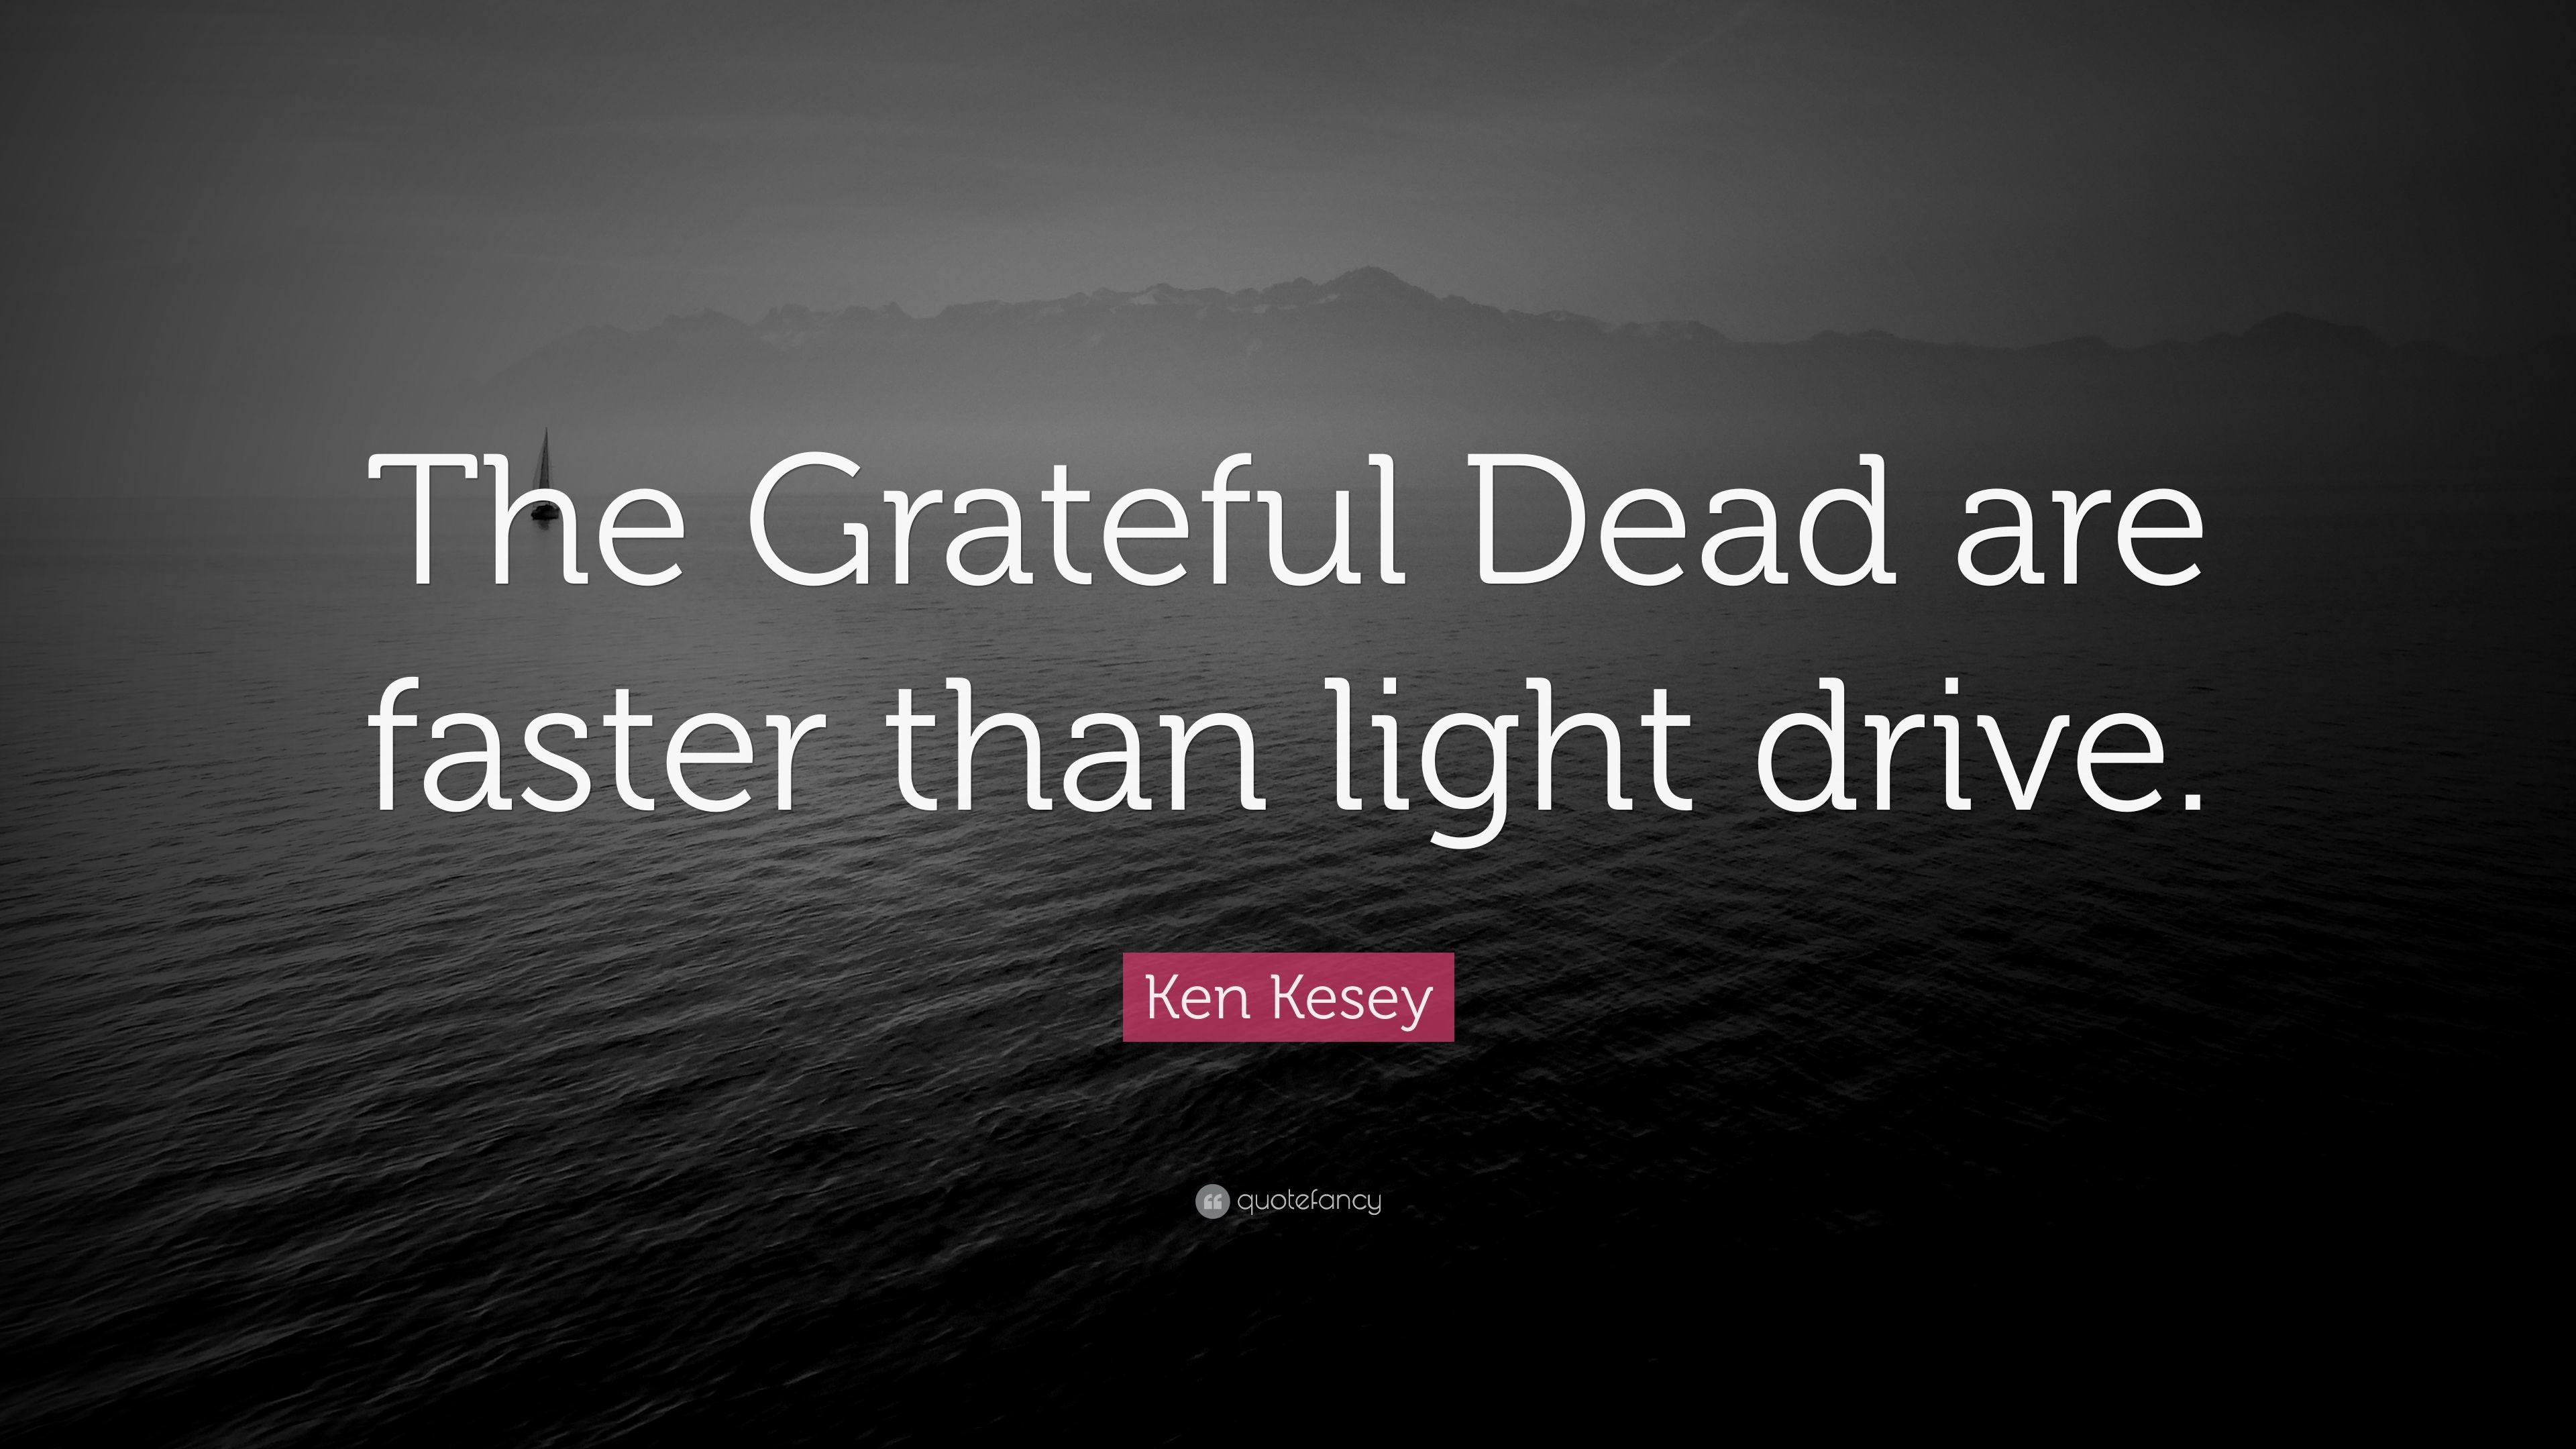 3840x2160 Ken Kesey Quote: “The Grateful Dead are faster than light drive.”